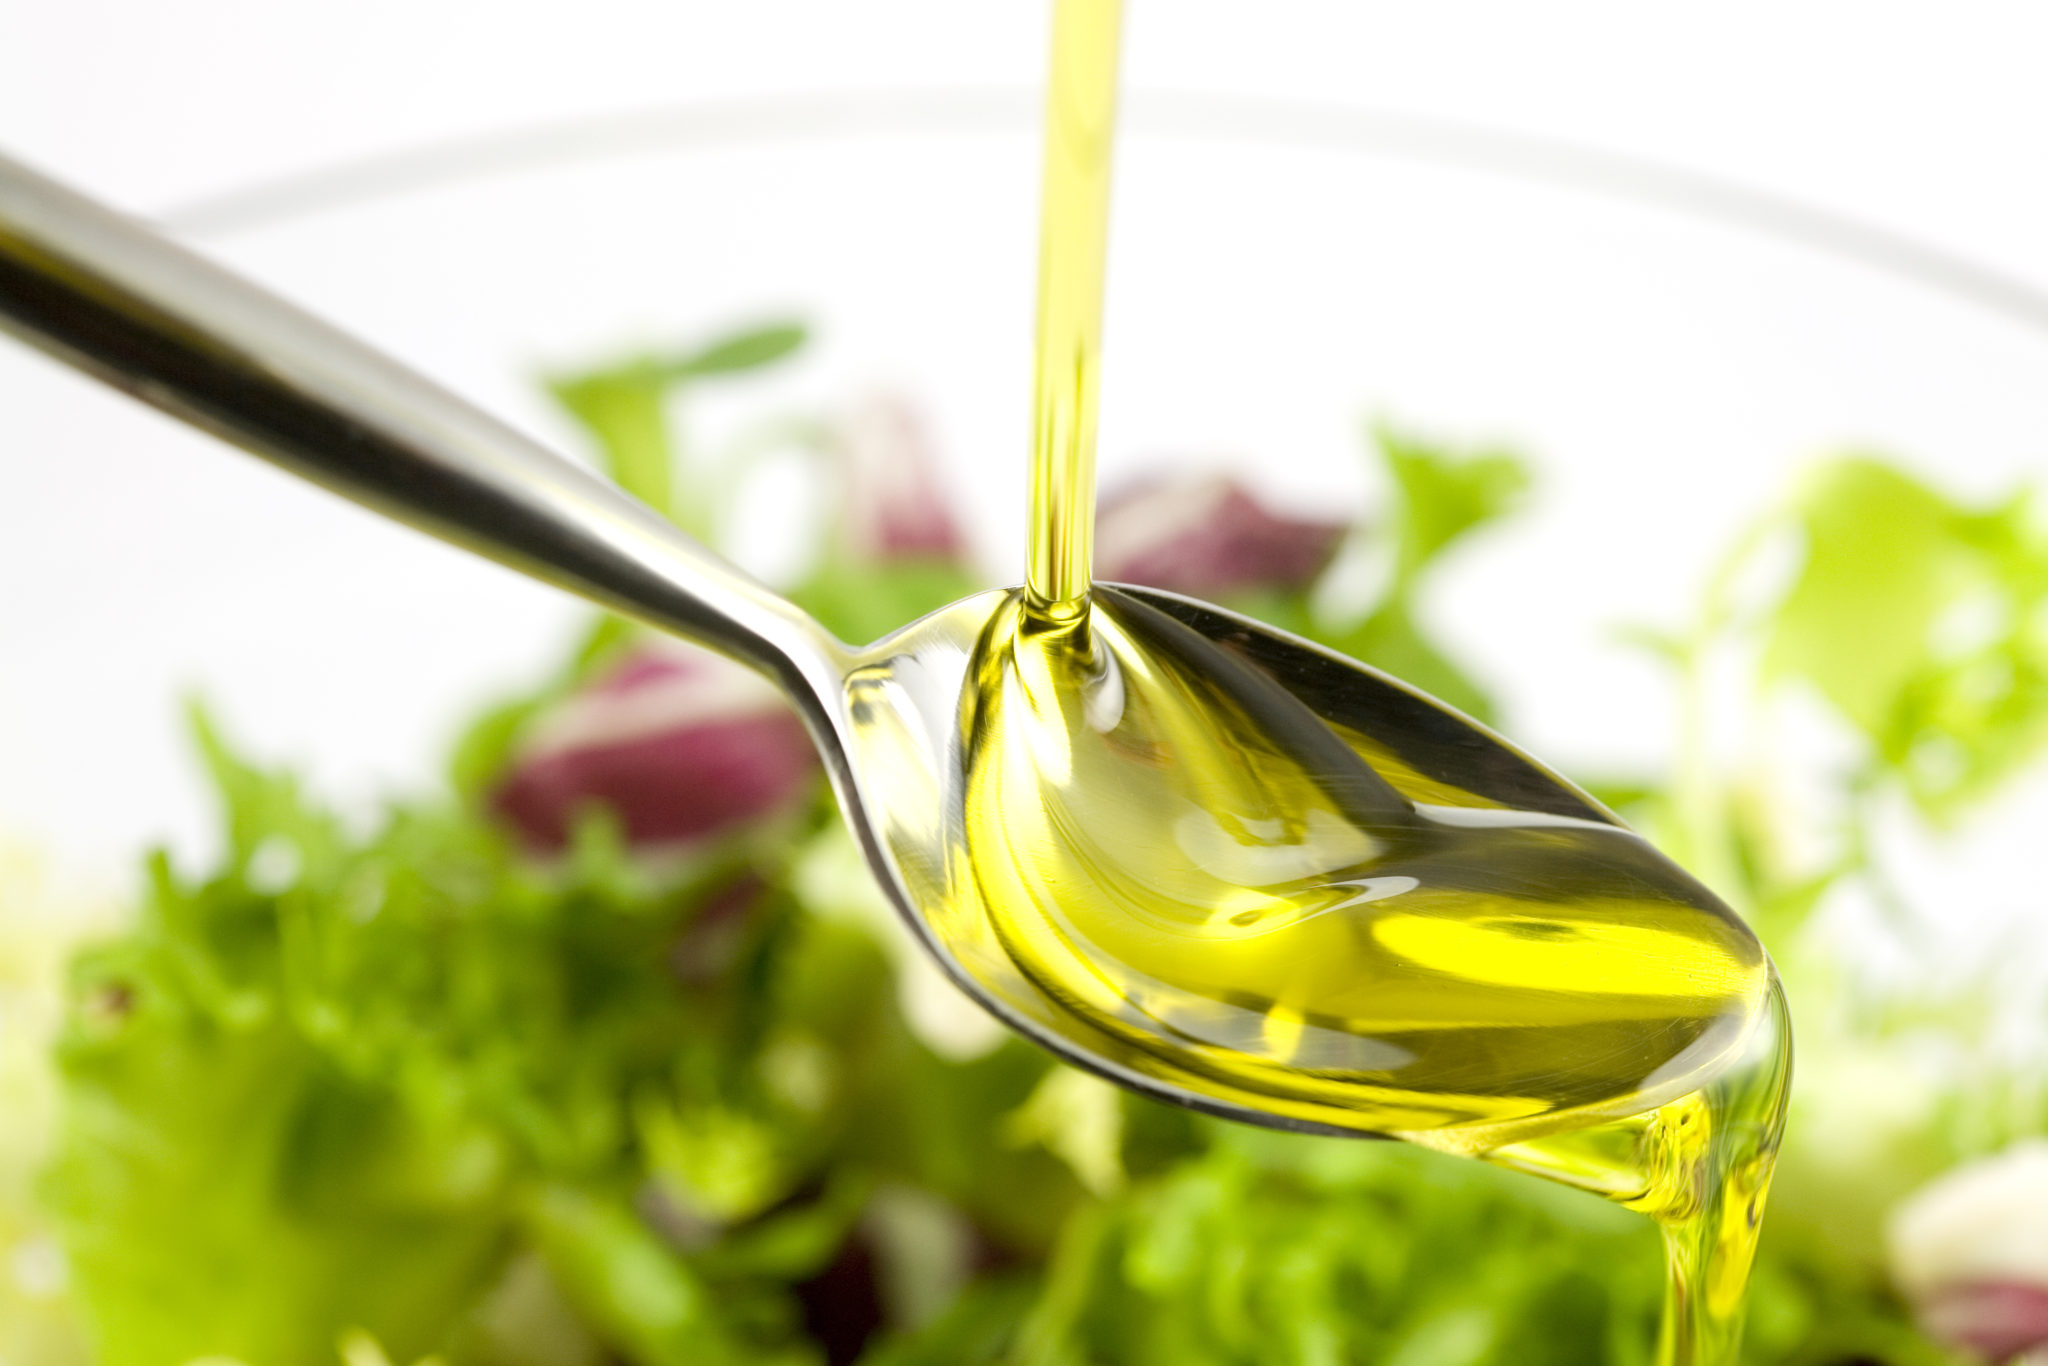 Depending on what you're cooking or baking, certain oils should be used. 